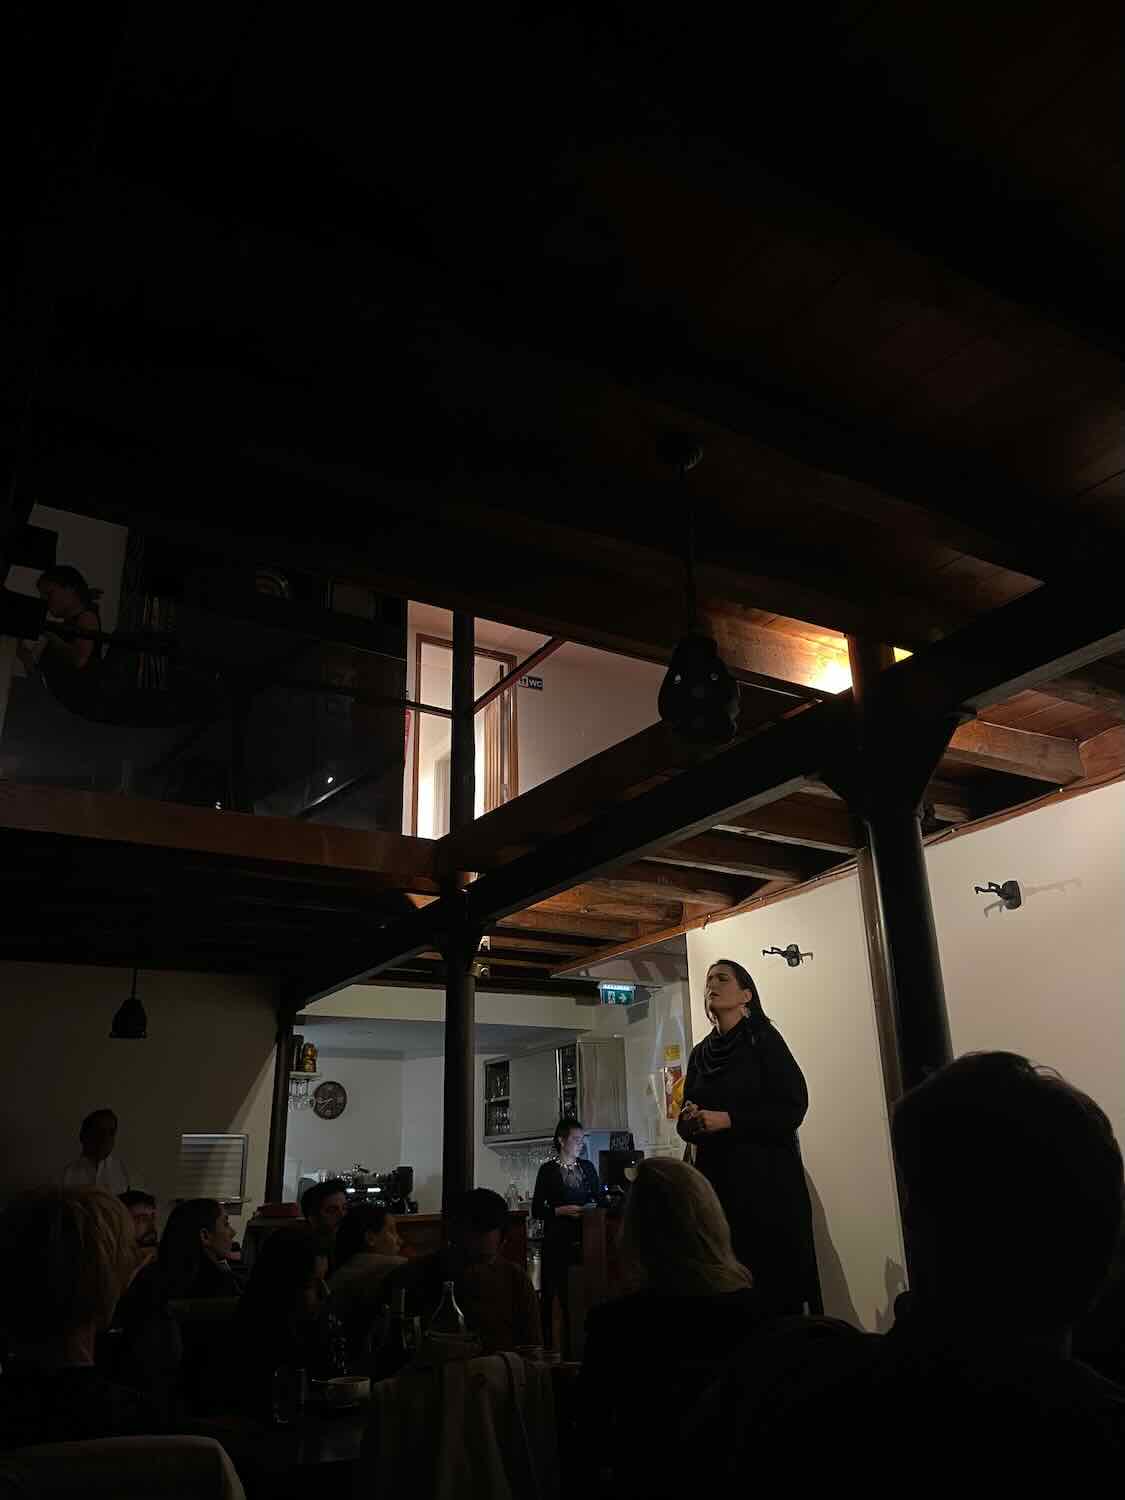 A dimly lit Lisbon Fado restaurant with an audience captivated by a Fado singer's emotional performance, exemplifying the city's rich cultural scene.